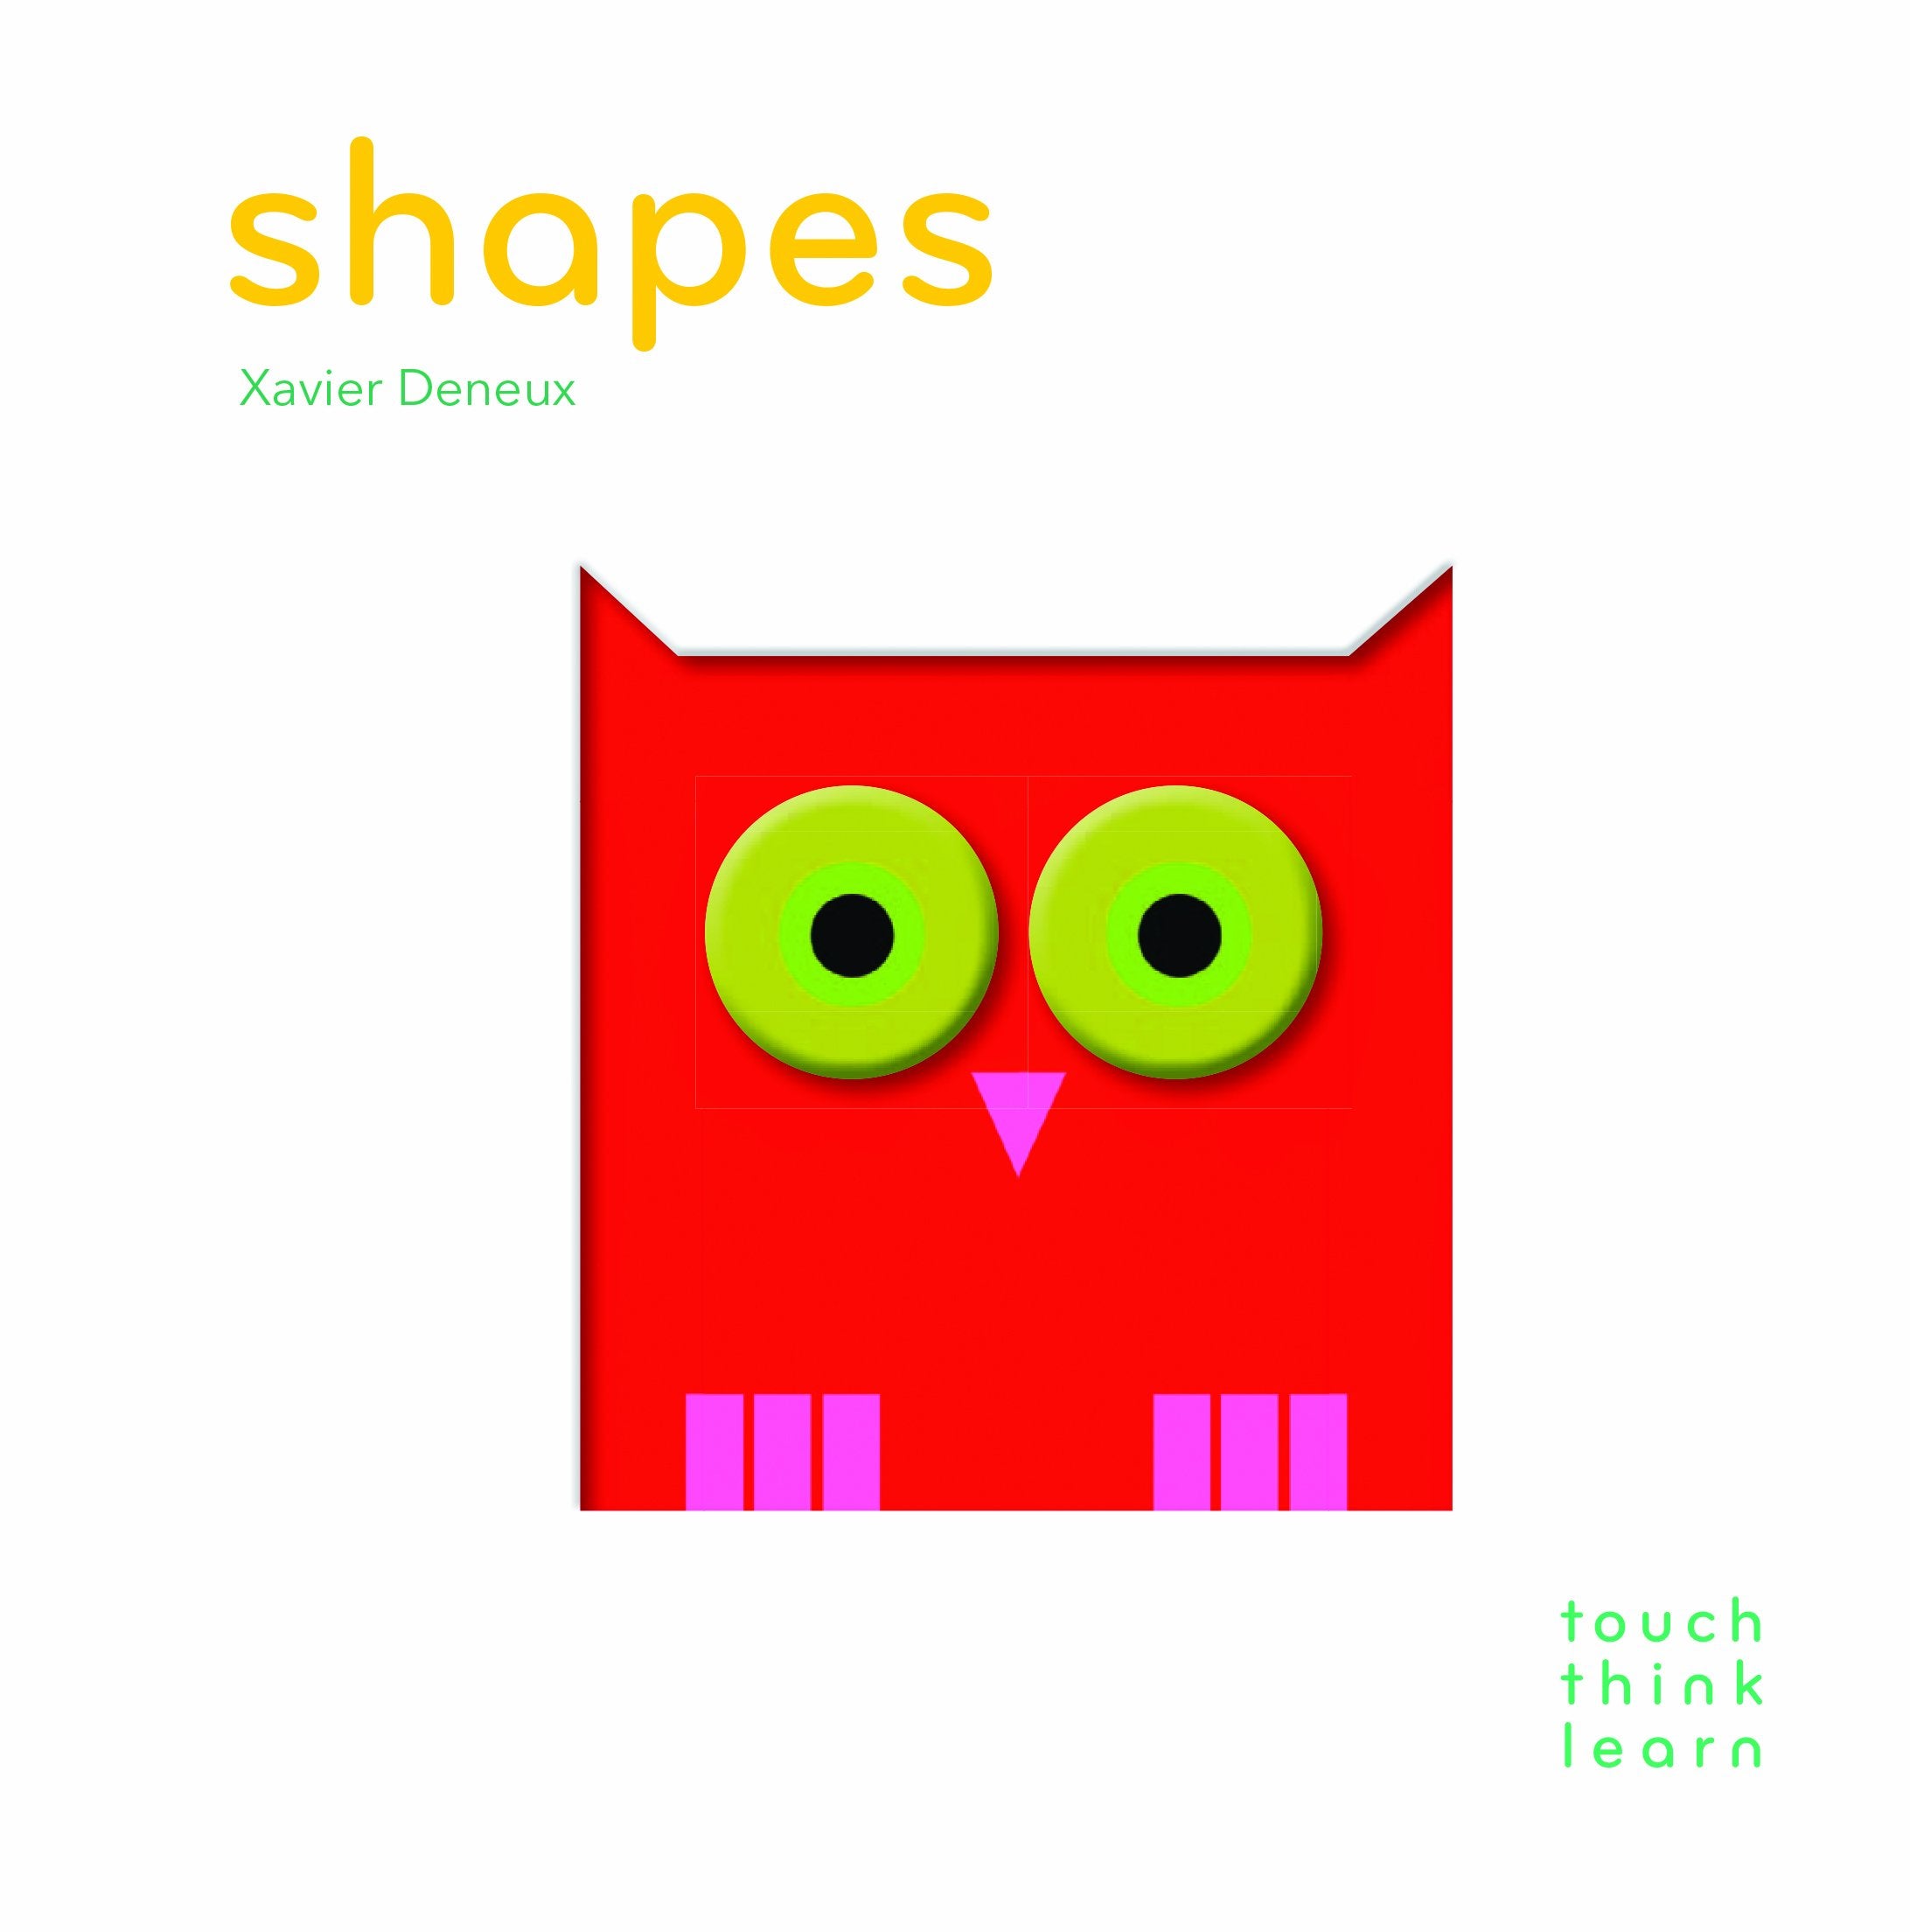 Touchthinklearn: Shapes